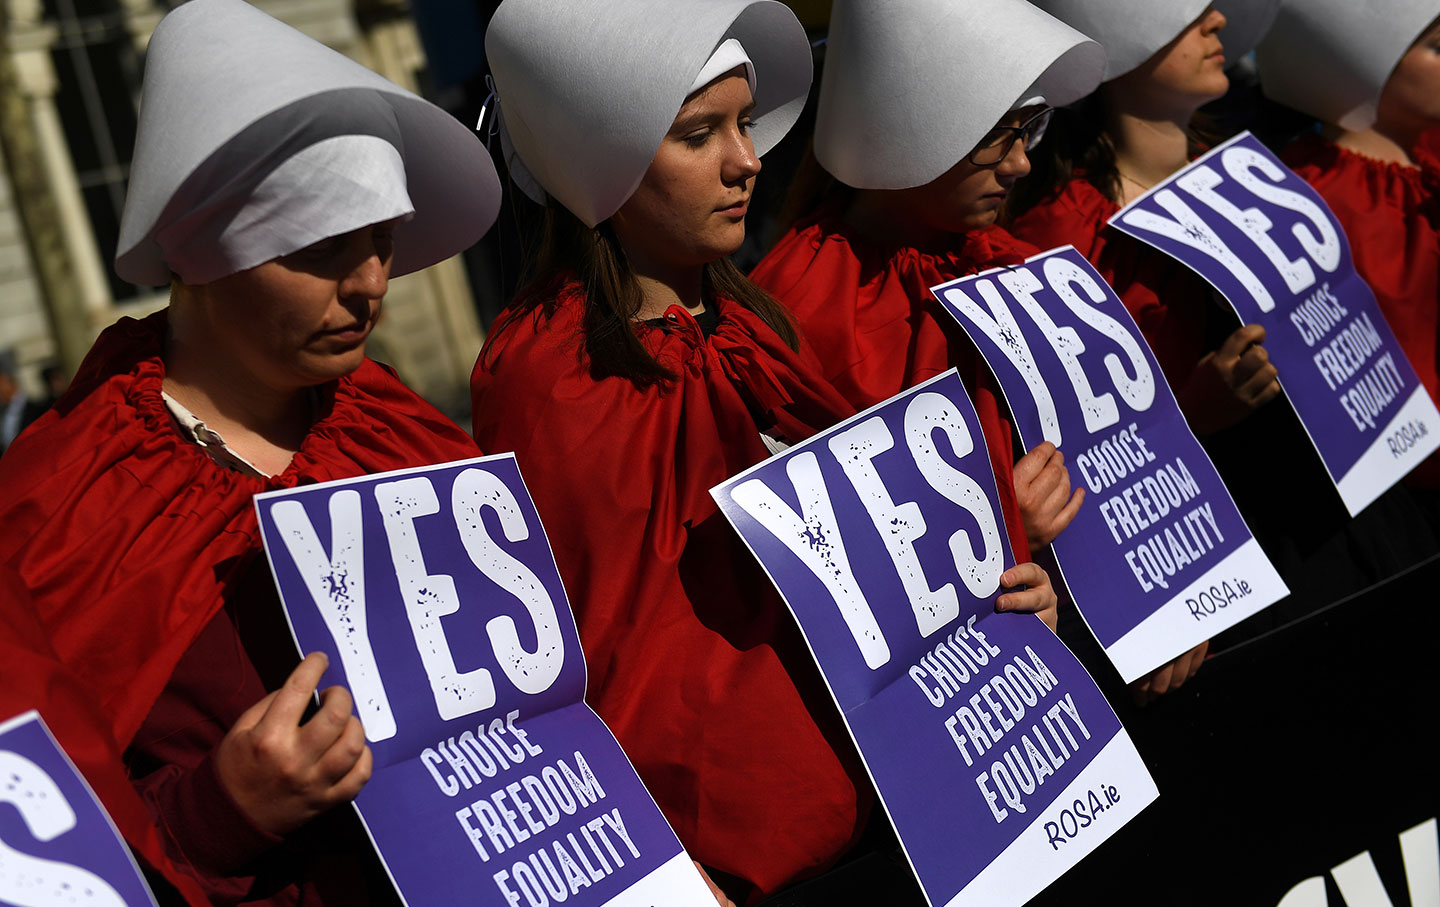 Will Ireland Vote to End Its Constitutional Ban on Almost All Abortion?